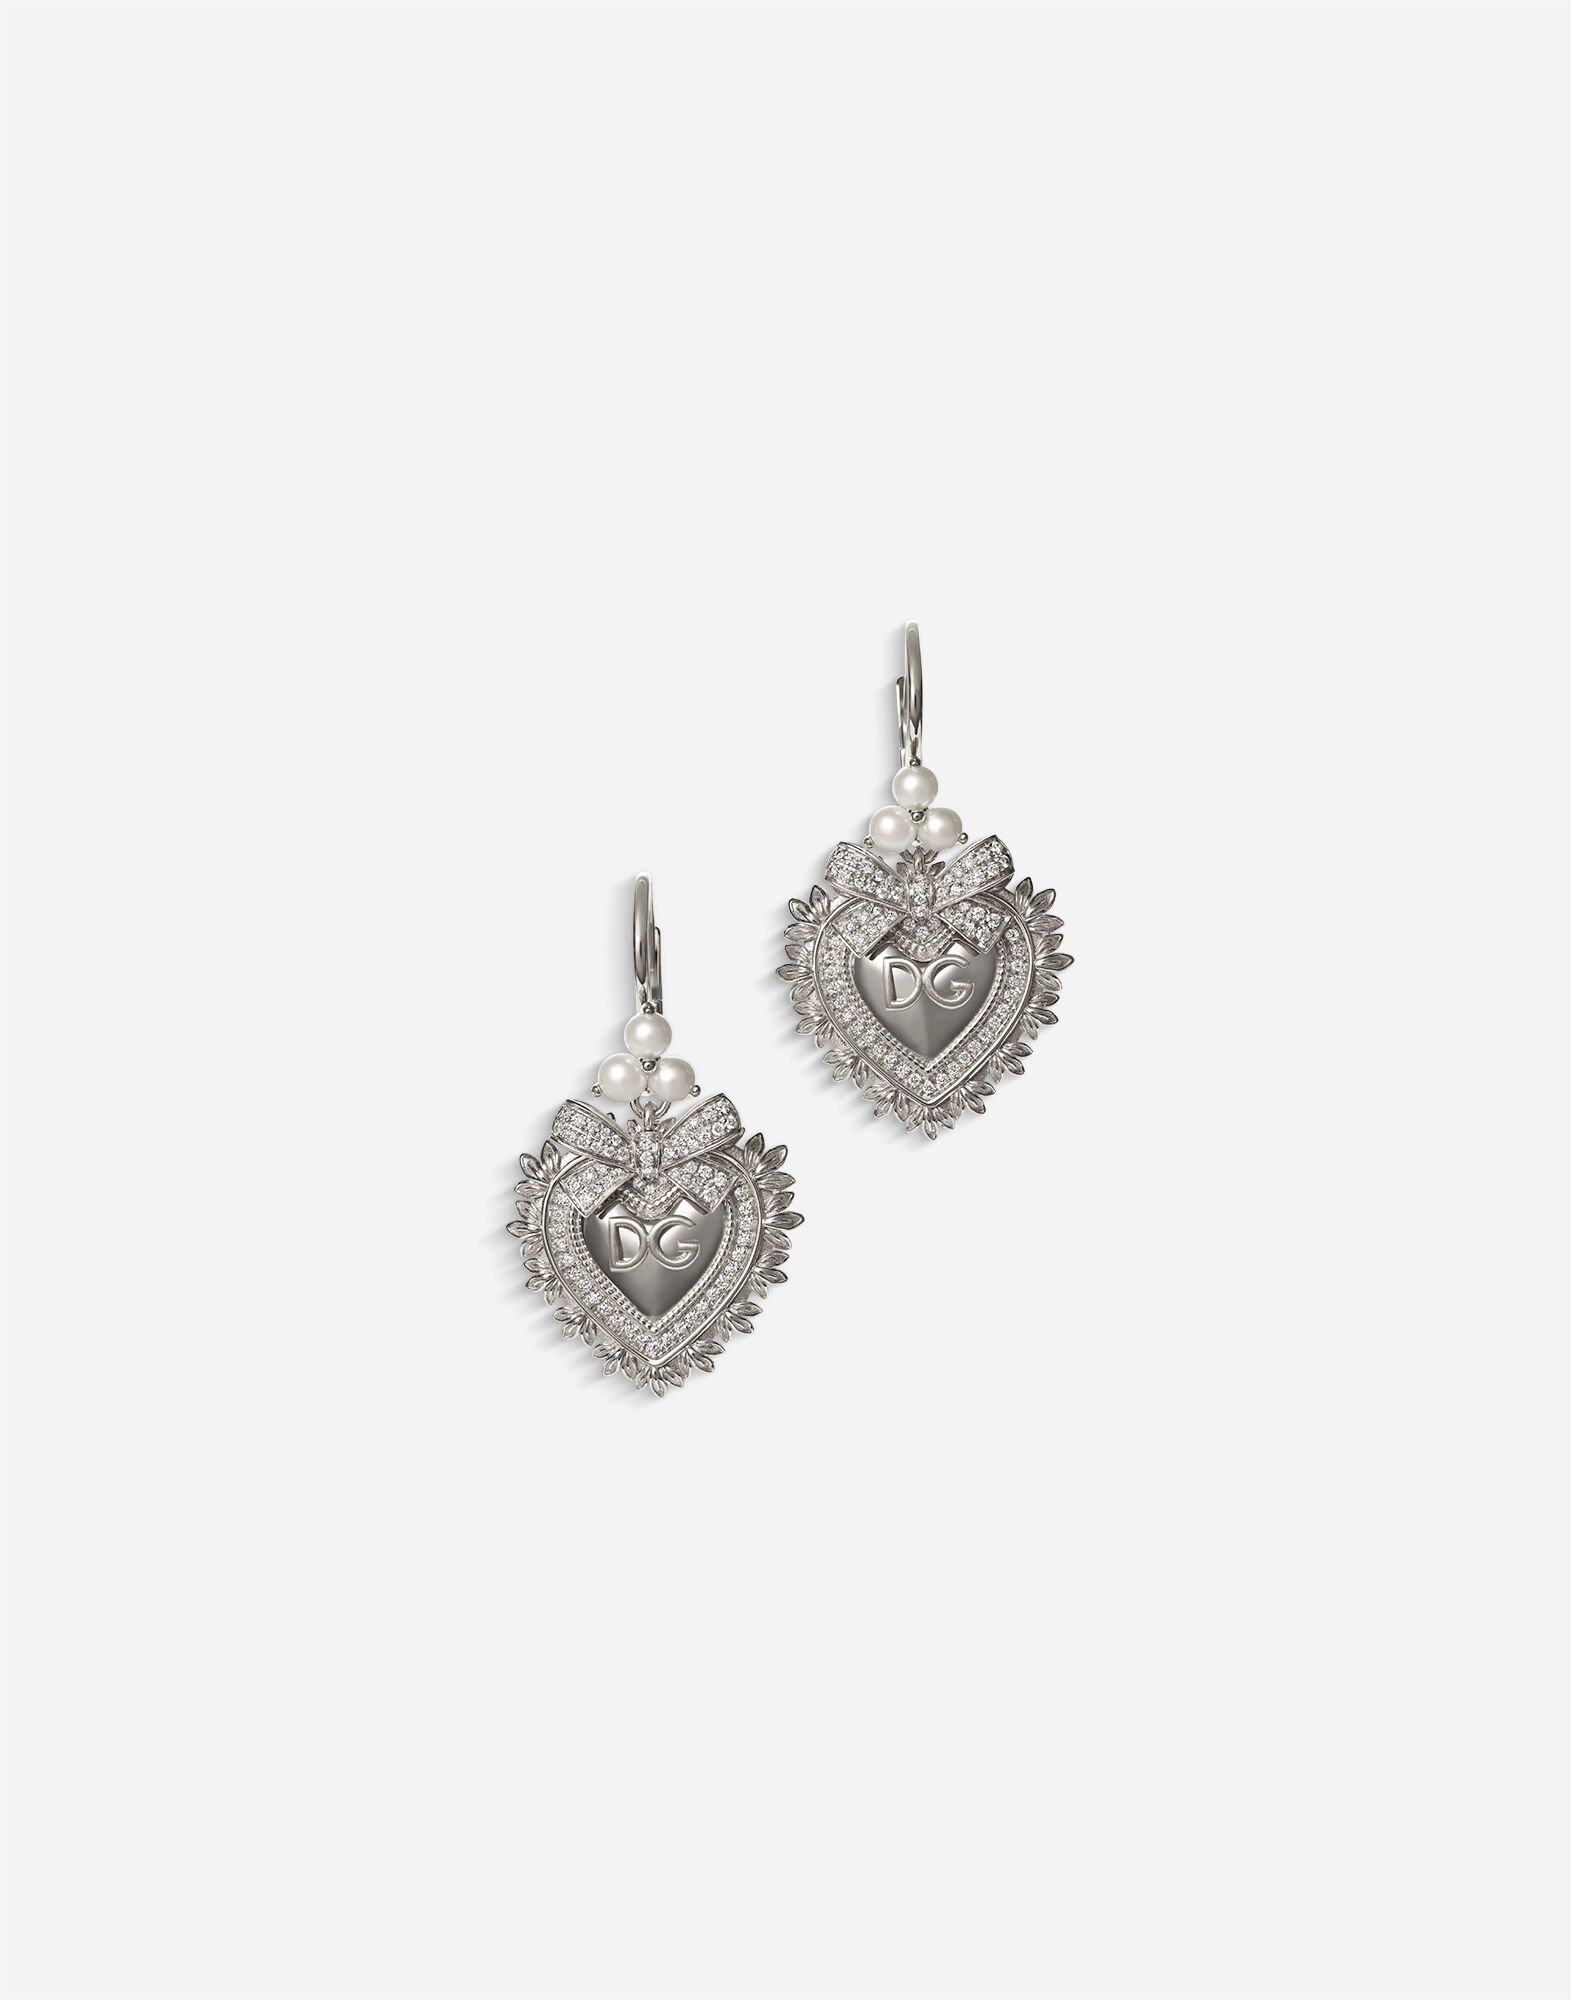 Dolce & Gabbana Devotion earrings in white gold with diamonds and pearls Yellow Gold WALD1GWDPEY